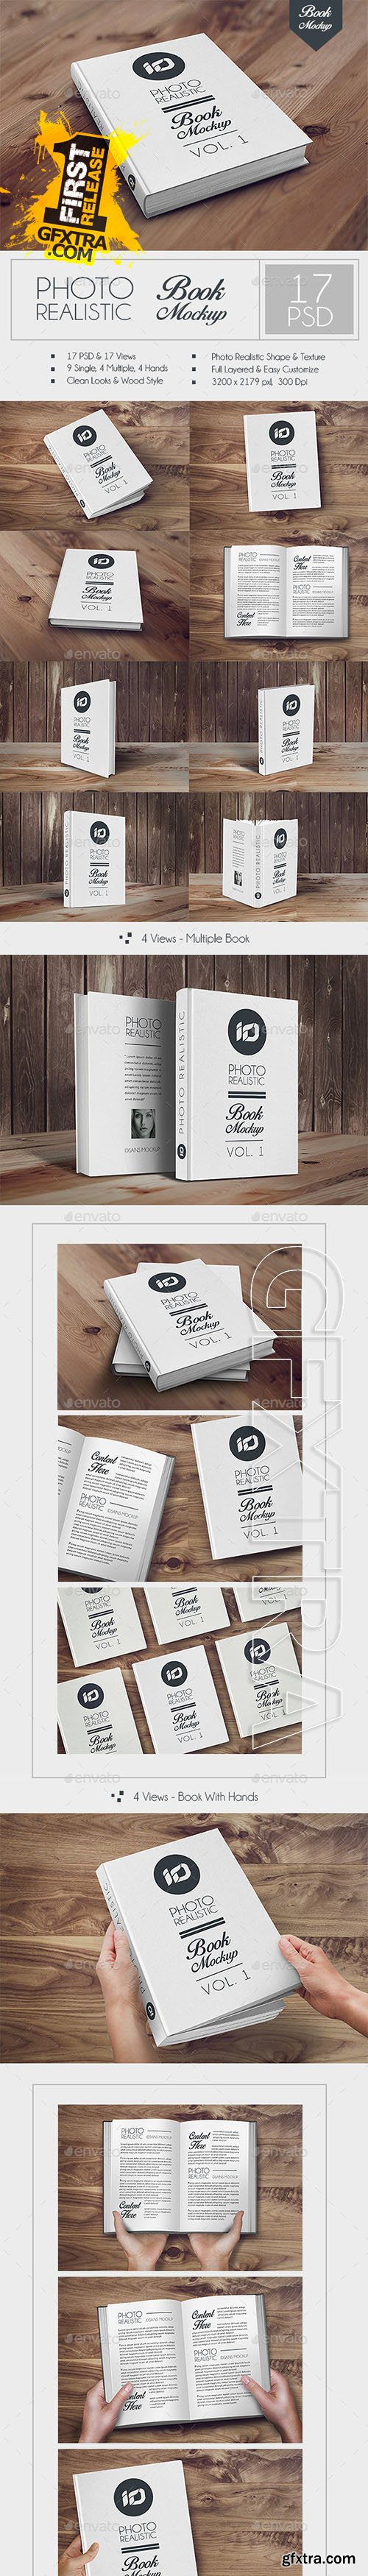 GraphicRiver ID Book Mock-up Photorealistic 8974134